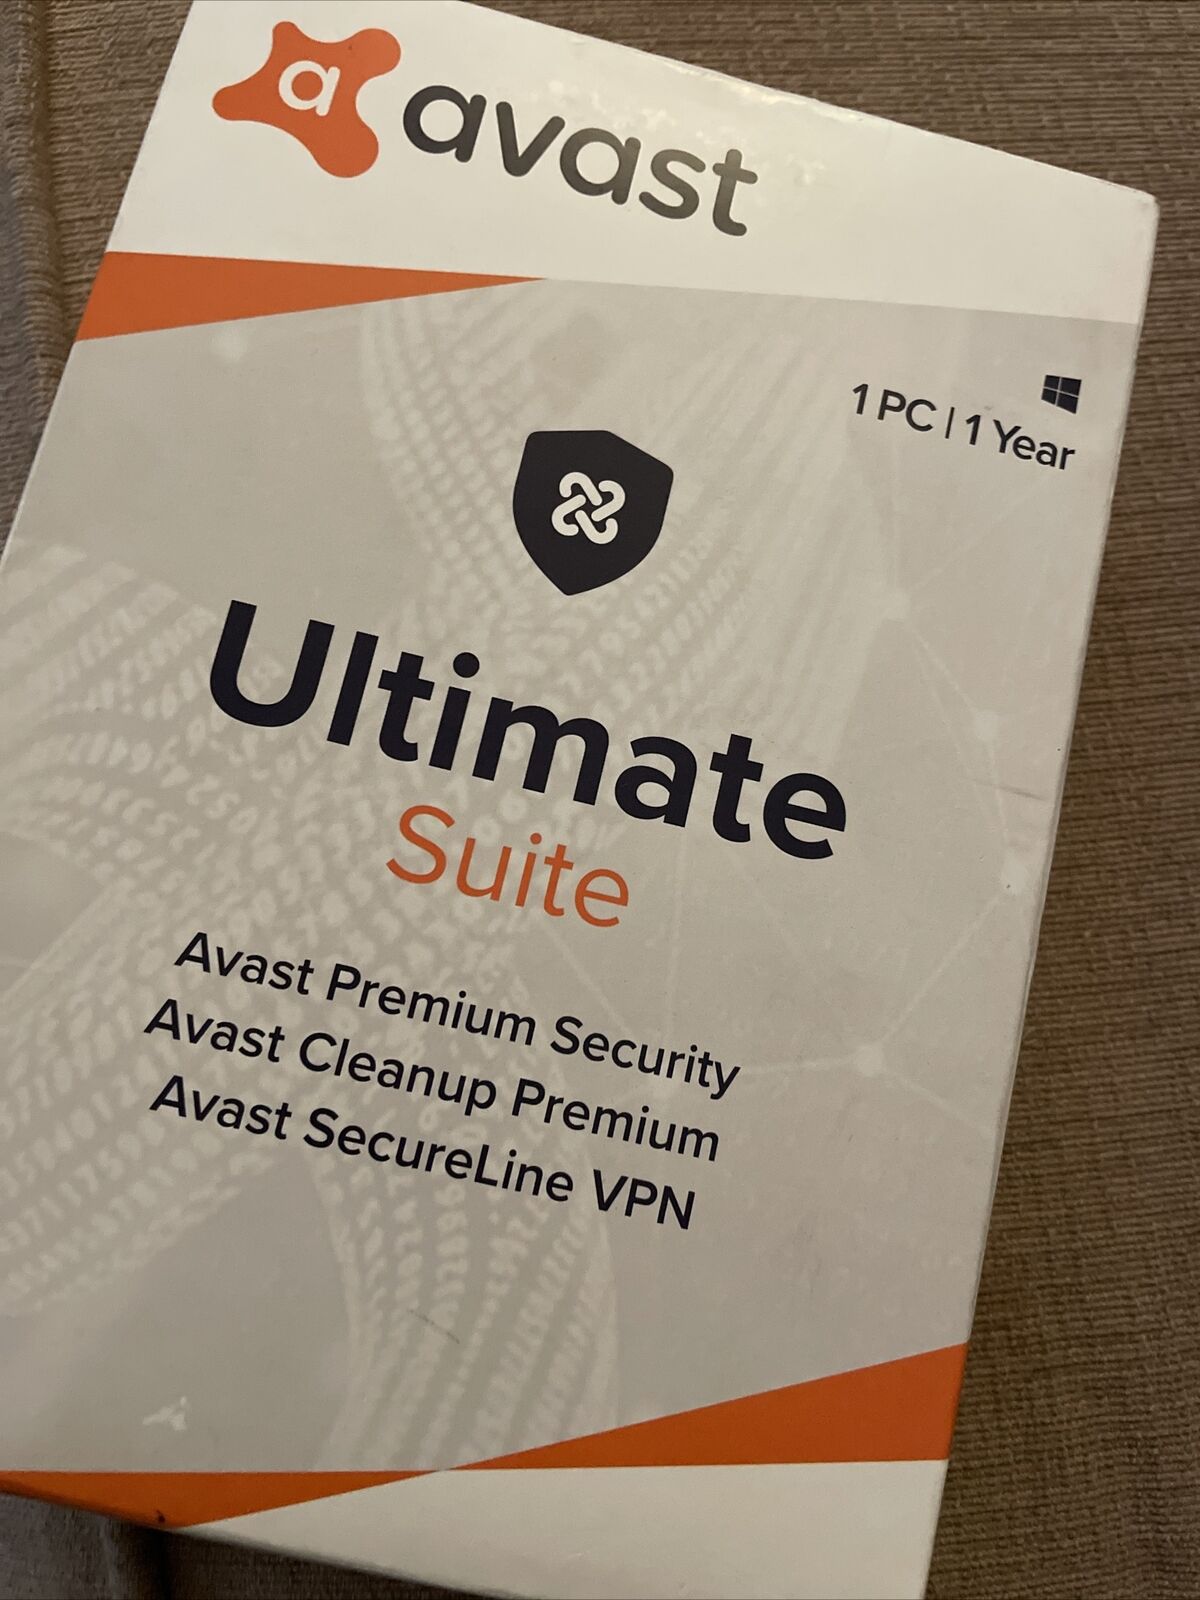 NEW Avast Ultimate Suite (3 Software for Windows Device, 1 Year)